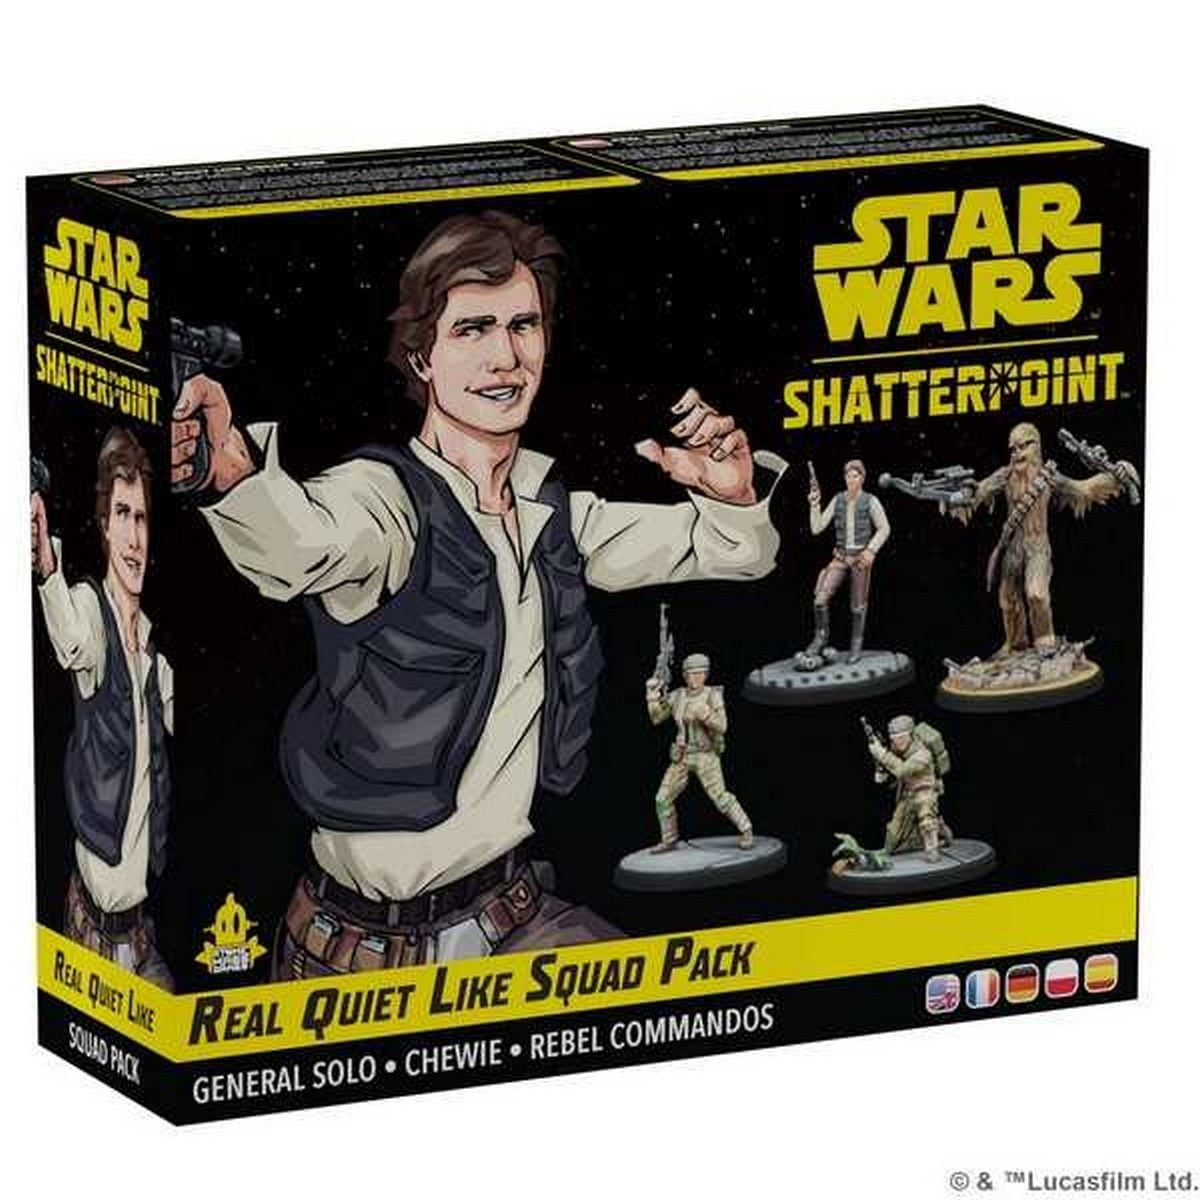 Star Wars: Shatterpoint: Real Quiet Like Squad Pack